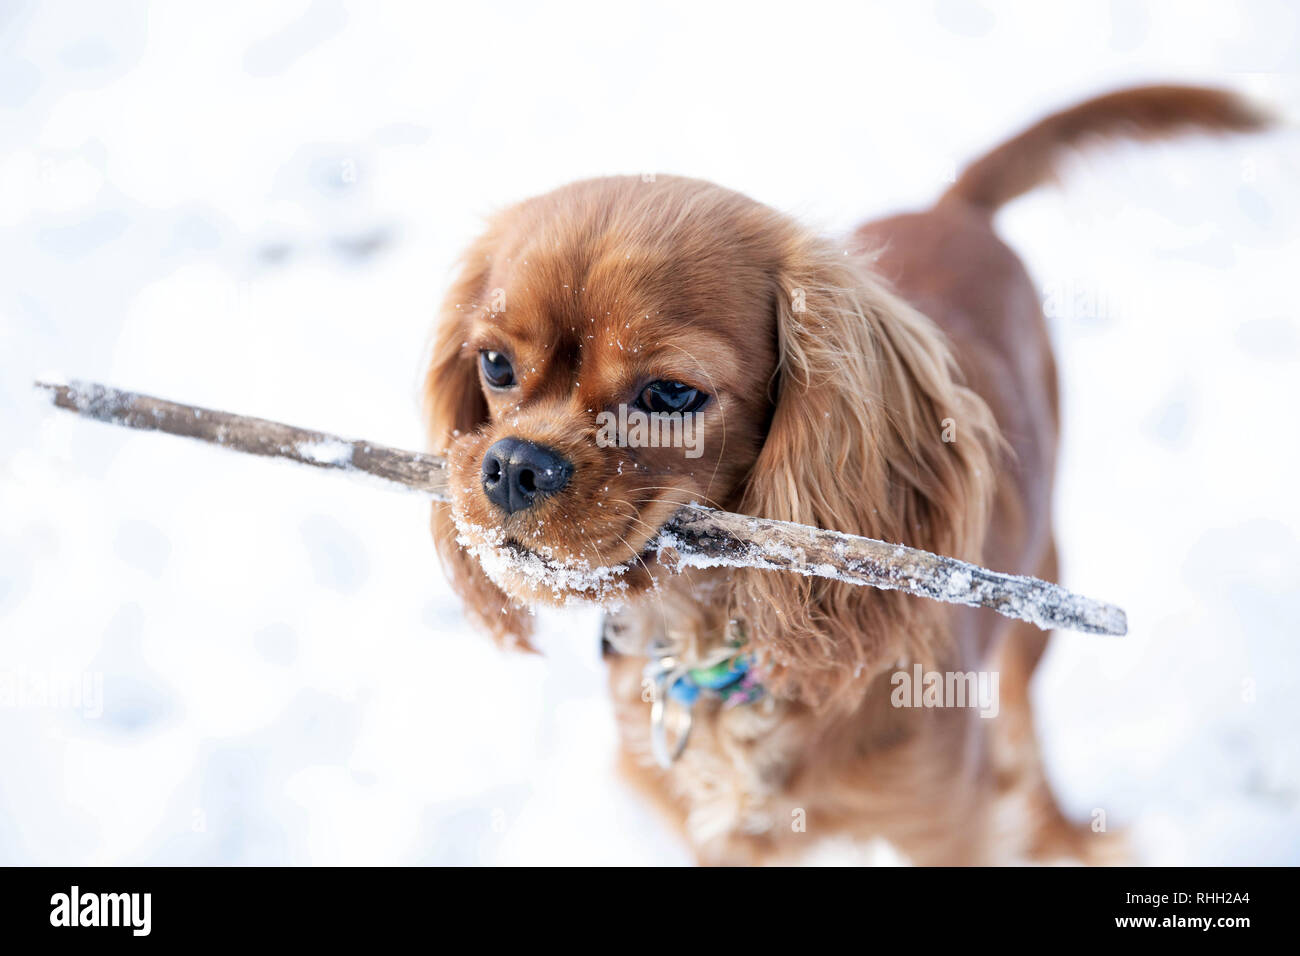 Dog with stick in mouth plays in the snow Stock Photo